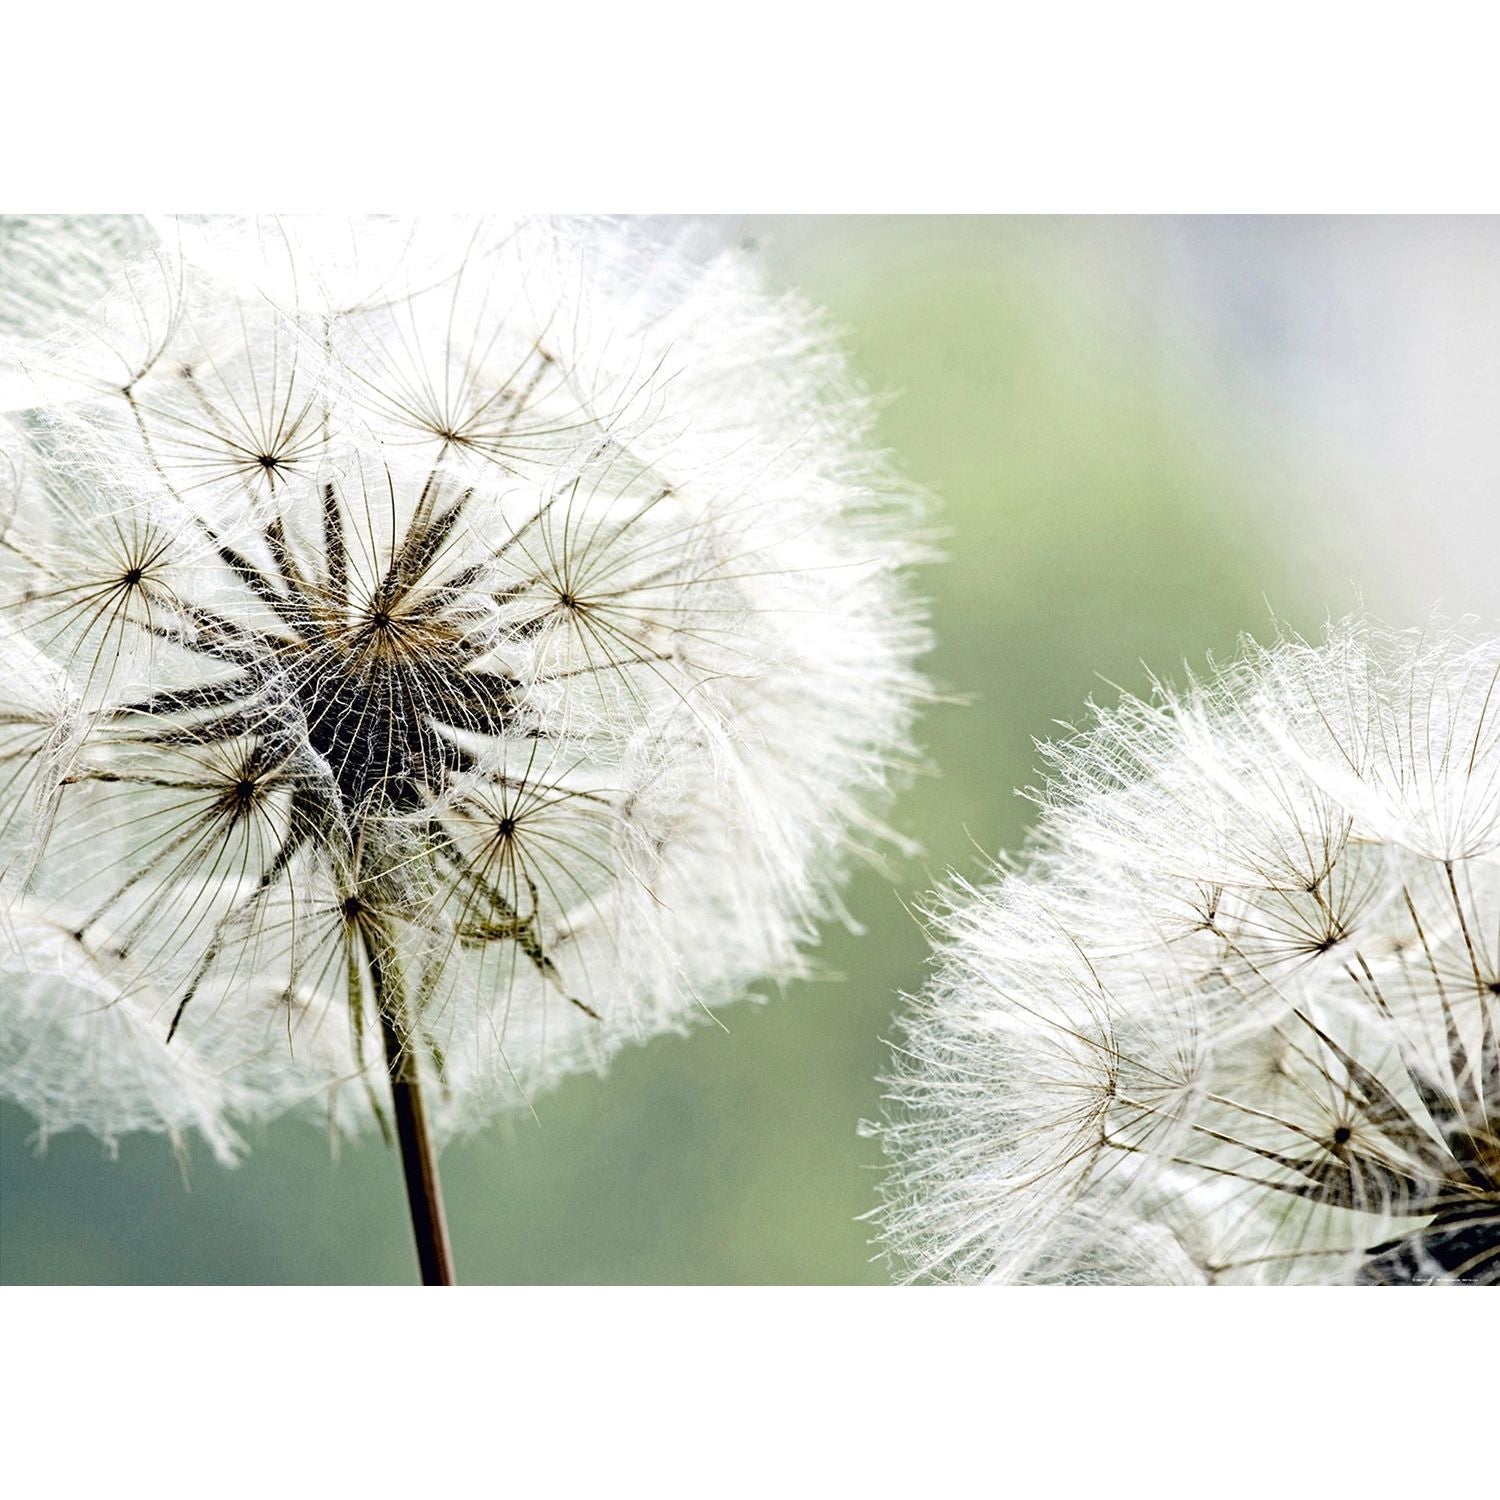 Whispers of Nature: Ethereal Dandelion Art Wall Mural